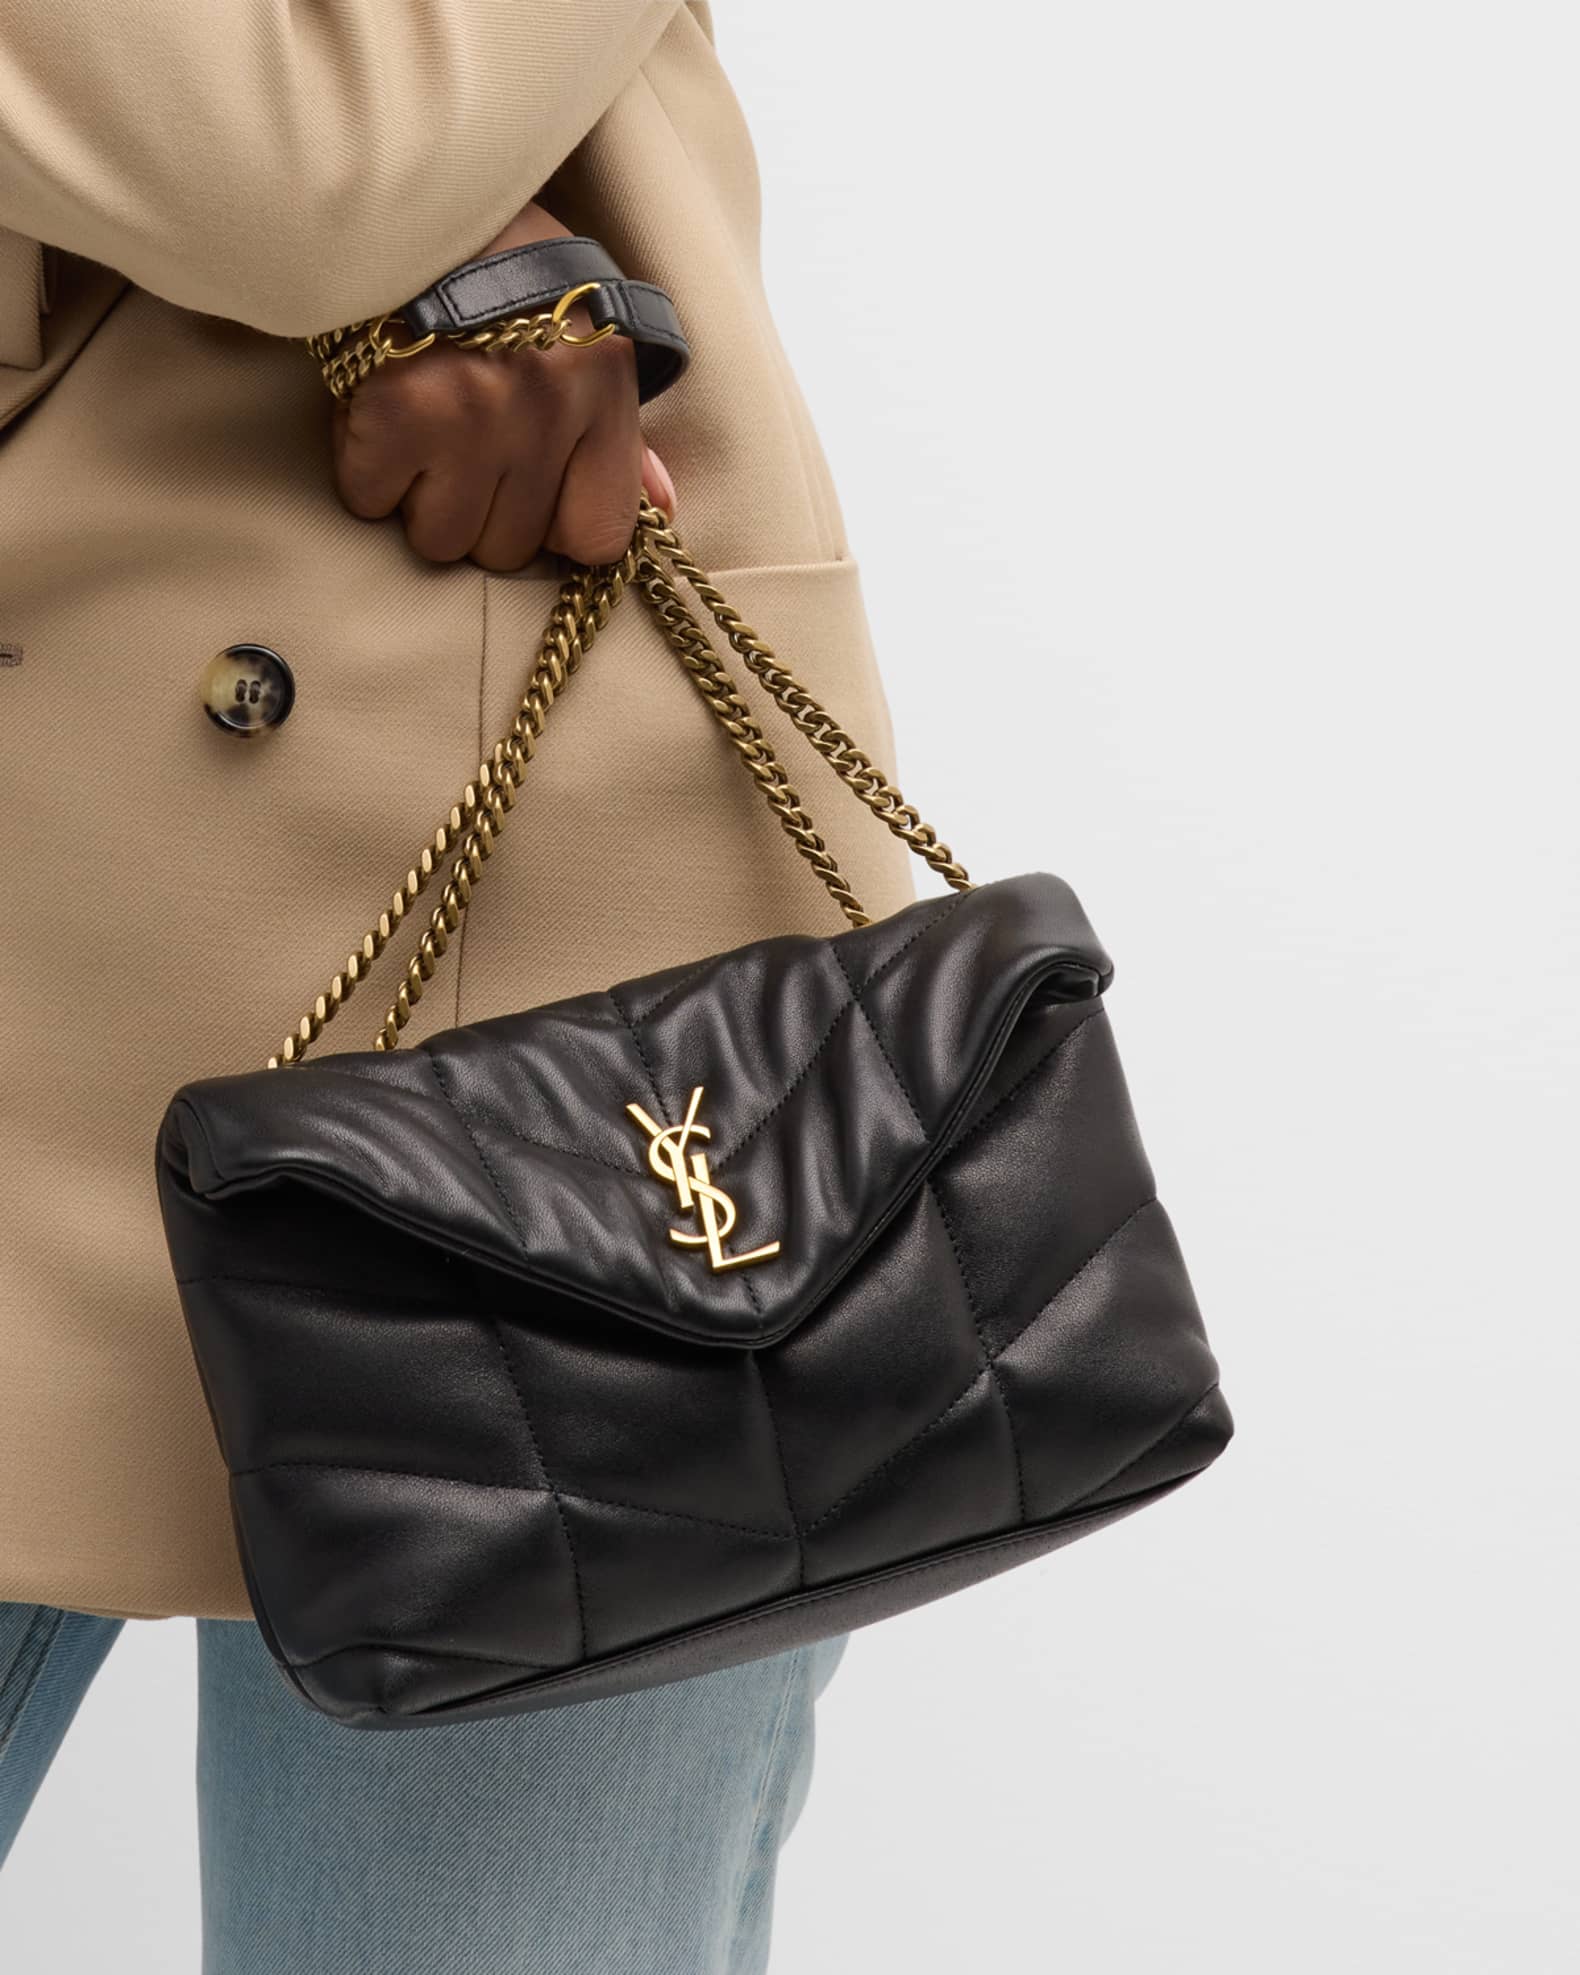 Saint Laurent Toy YSL Quilted Puffer Chain Shoulder Bag | Neiman Marcus